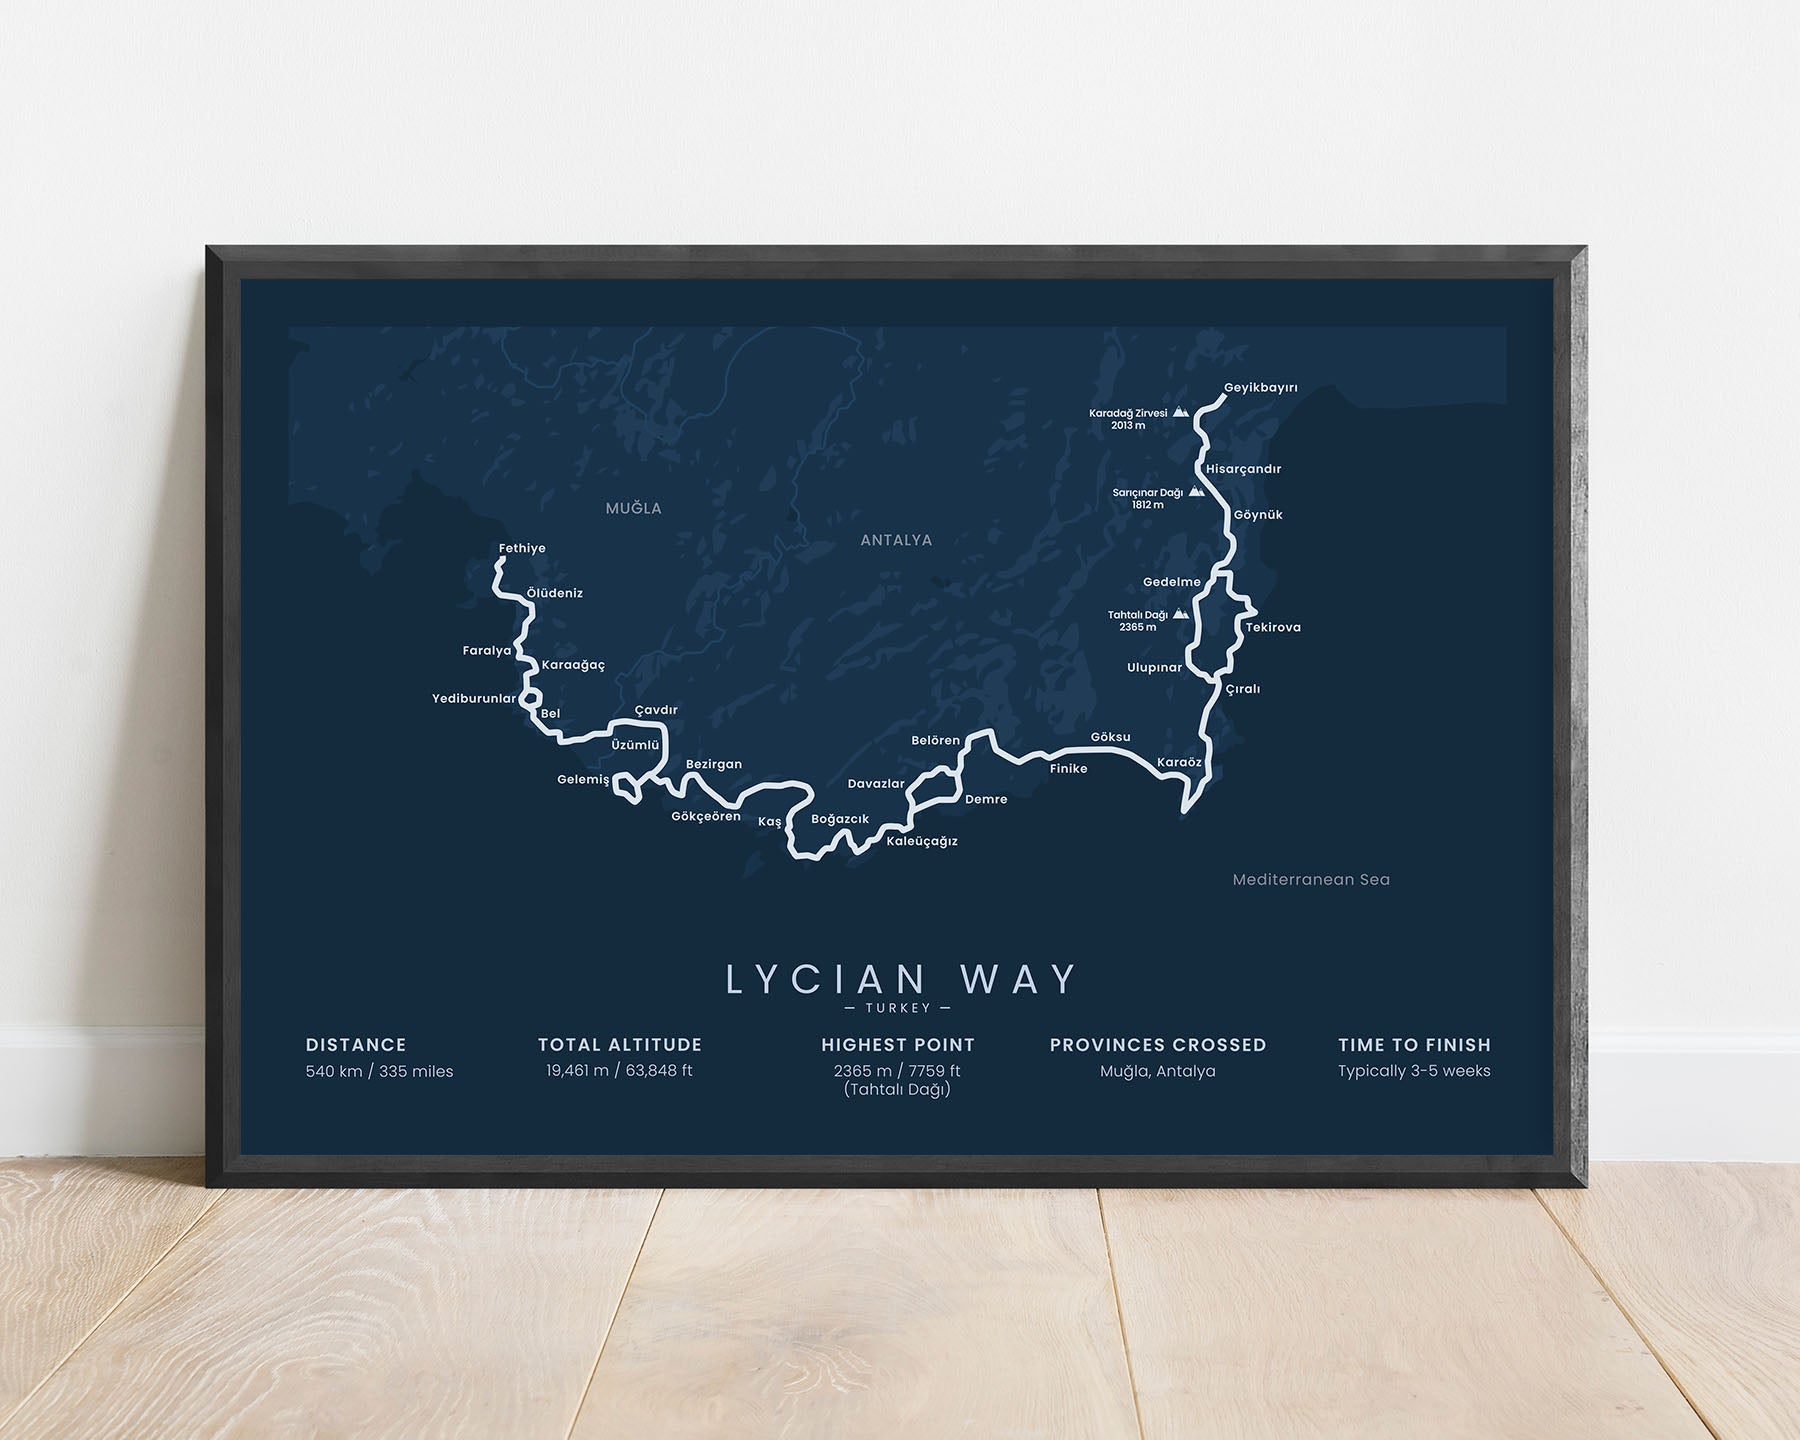 Lycian Way hiking trail in Mediterranean, South Turkey, minimalist map poster with black frame and blue background